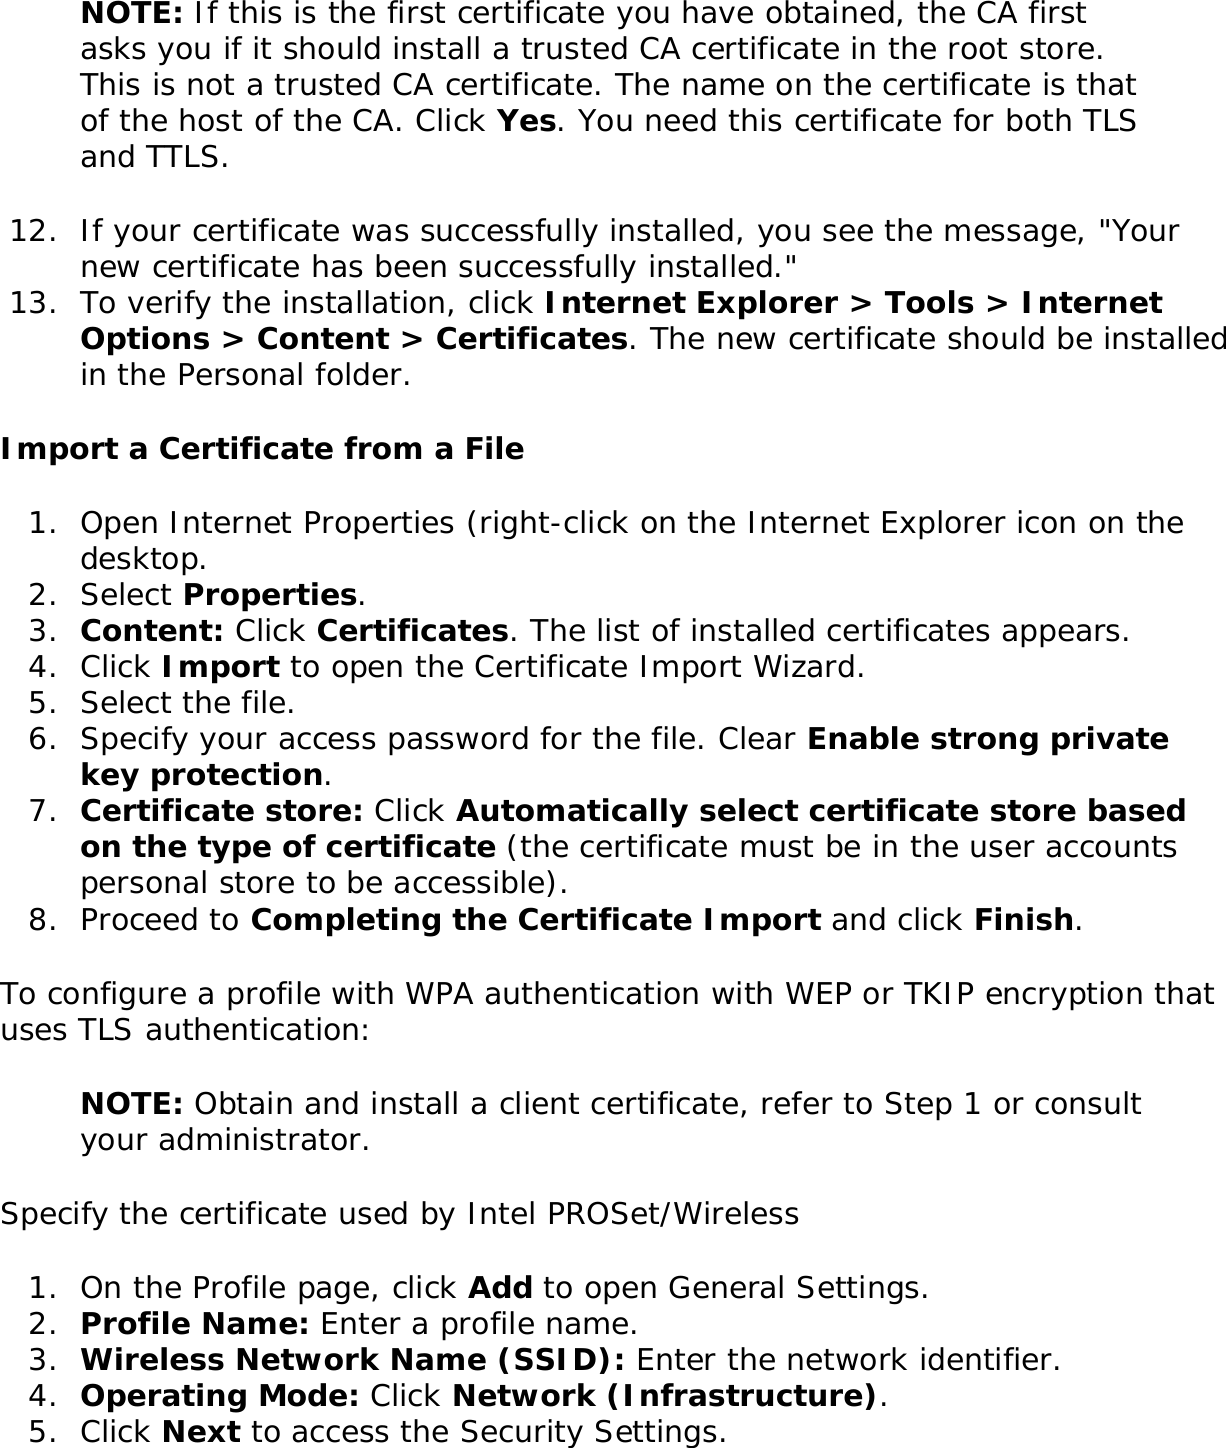 NOTE: If this is the first certificate you have obtained, the CA first asks you if it should install a trusted CA certificate in the root store. This is not a trusted CA certificate. The name on the certificate is that of the host of the CA. Click Yes. You need this certificate for both TLS and TTLS. 12.  If your certificate was successfully installed, you see the message, &quot;Your new certificate has been successfully installed.&quot;13.  To verify the installation, click Internet Explorer &gt; Tools &gt; Internet Options &gt; Content &gt; Certificates. The new certificate should be installed in the Personal folder.Import a Certificate from a File1.  Open Internet Properties (right-click on the Internet Explorer icon on the desktop.2.  Select Properties.3.  Content: Click Certificates. The list of installed certificates appears.4.  Click Import to open the Certificate Import Wizard. 5.  Select the file.6.  Specify your access password for the file. Clear Enable strong private key protection.7.  Certificate store: Click Automatically select certificate store based on the type of certificate (the certificate must be in the user accounts personal store to be accessible).8.  Proceed to Completing the Certificate Import and click Finish.To configure a profile with WPA authentication with WEP or TKIP encryption that uses TLS authentication: NOTE: Obtain and install a client certificate, refer to Step 1 or consult your administrator. Specify the certificate used by Intel PROSet/Wireless 1.  On the Profile page, click Add to open General Settings.2.  Profile Name: Enter a profile name.3.  Wireless Network Name (SSID): Enter the network identifier. 4.  Operating Mode: Click Network (Infrastructure). 5.  Click Next to access the Security Settings.